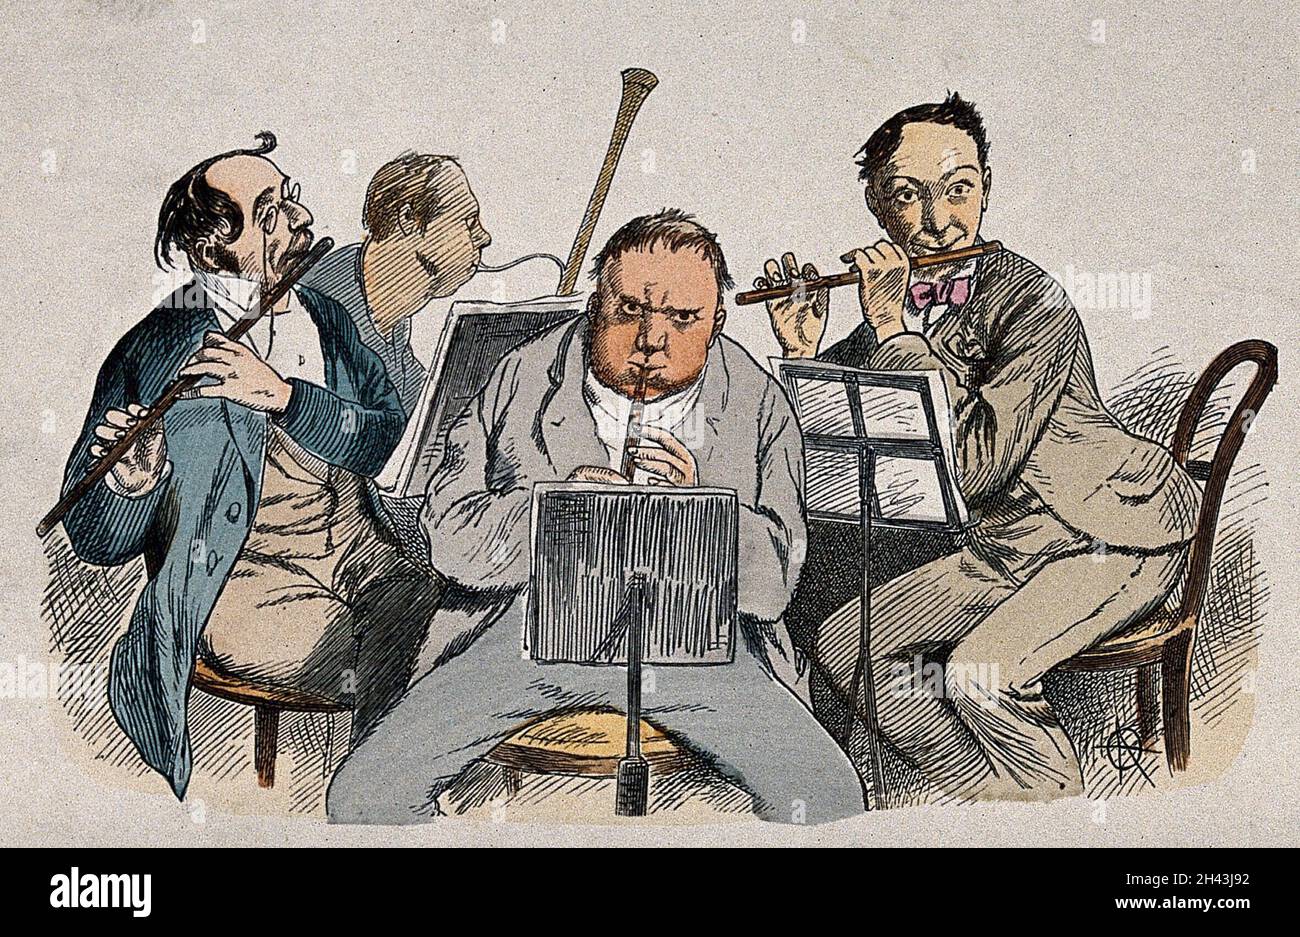 The woodwind section of an orchestra: four men playing. Coloured wood engraving after A. Oberländer, 1876. Stock Photo